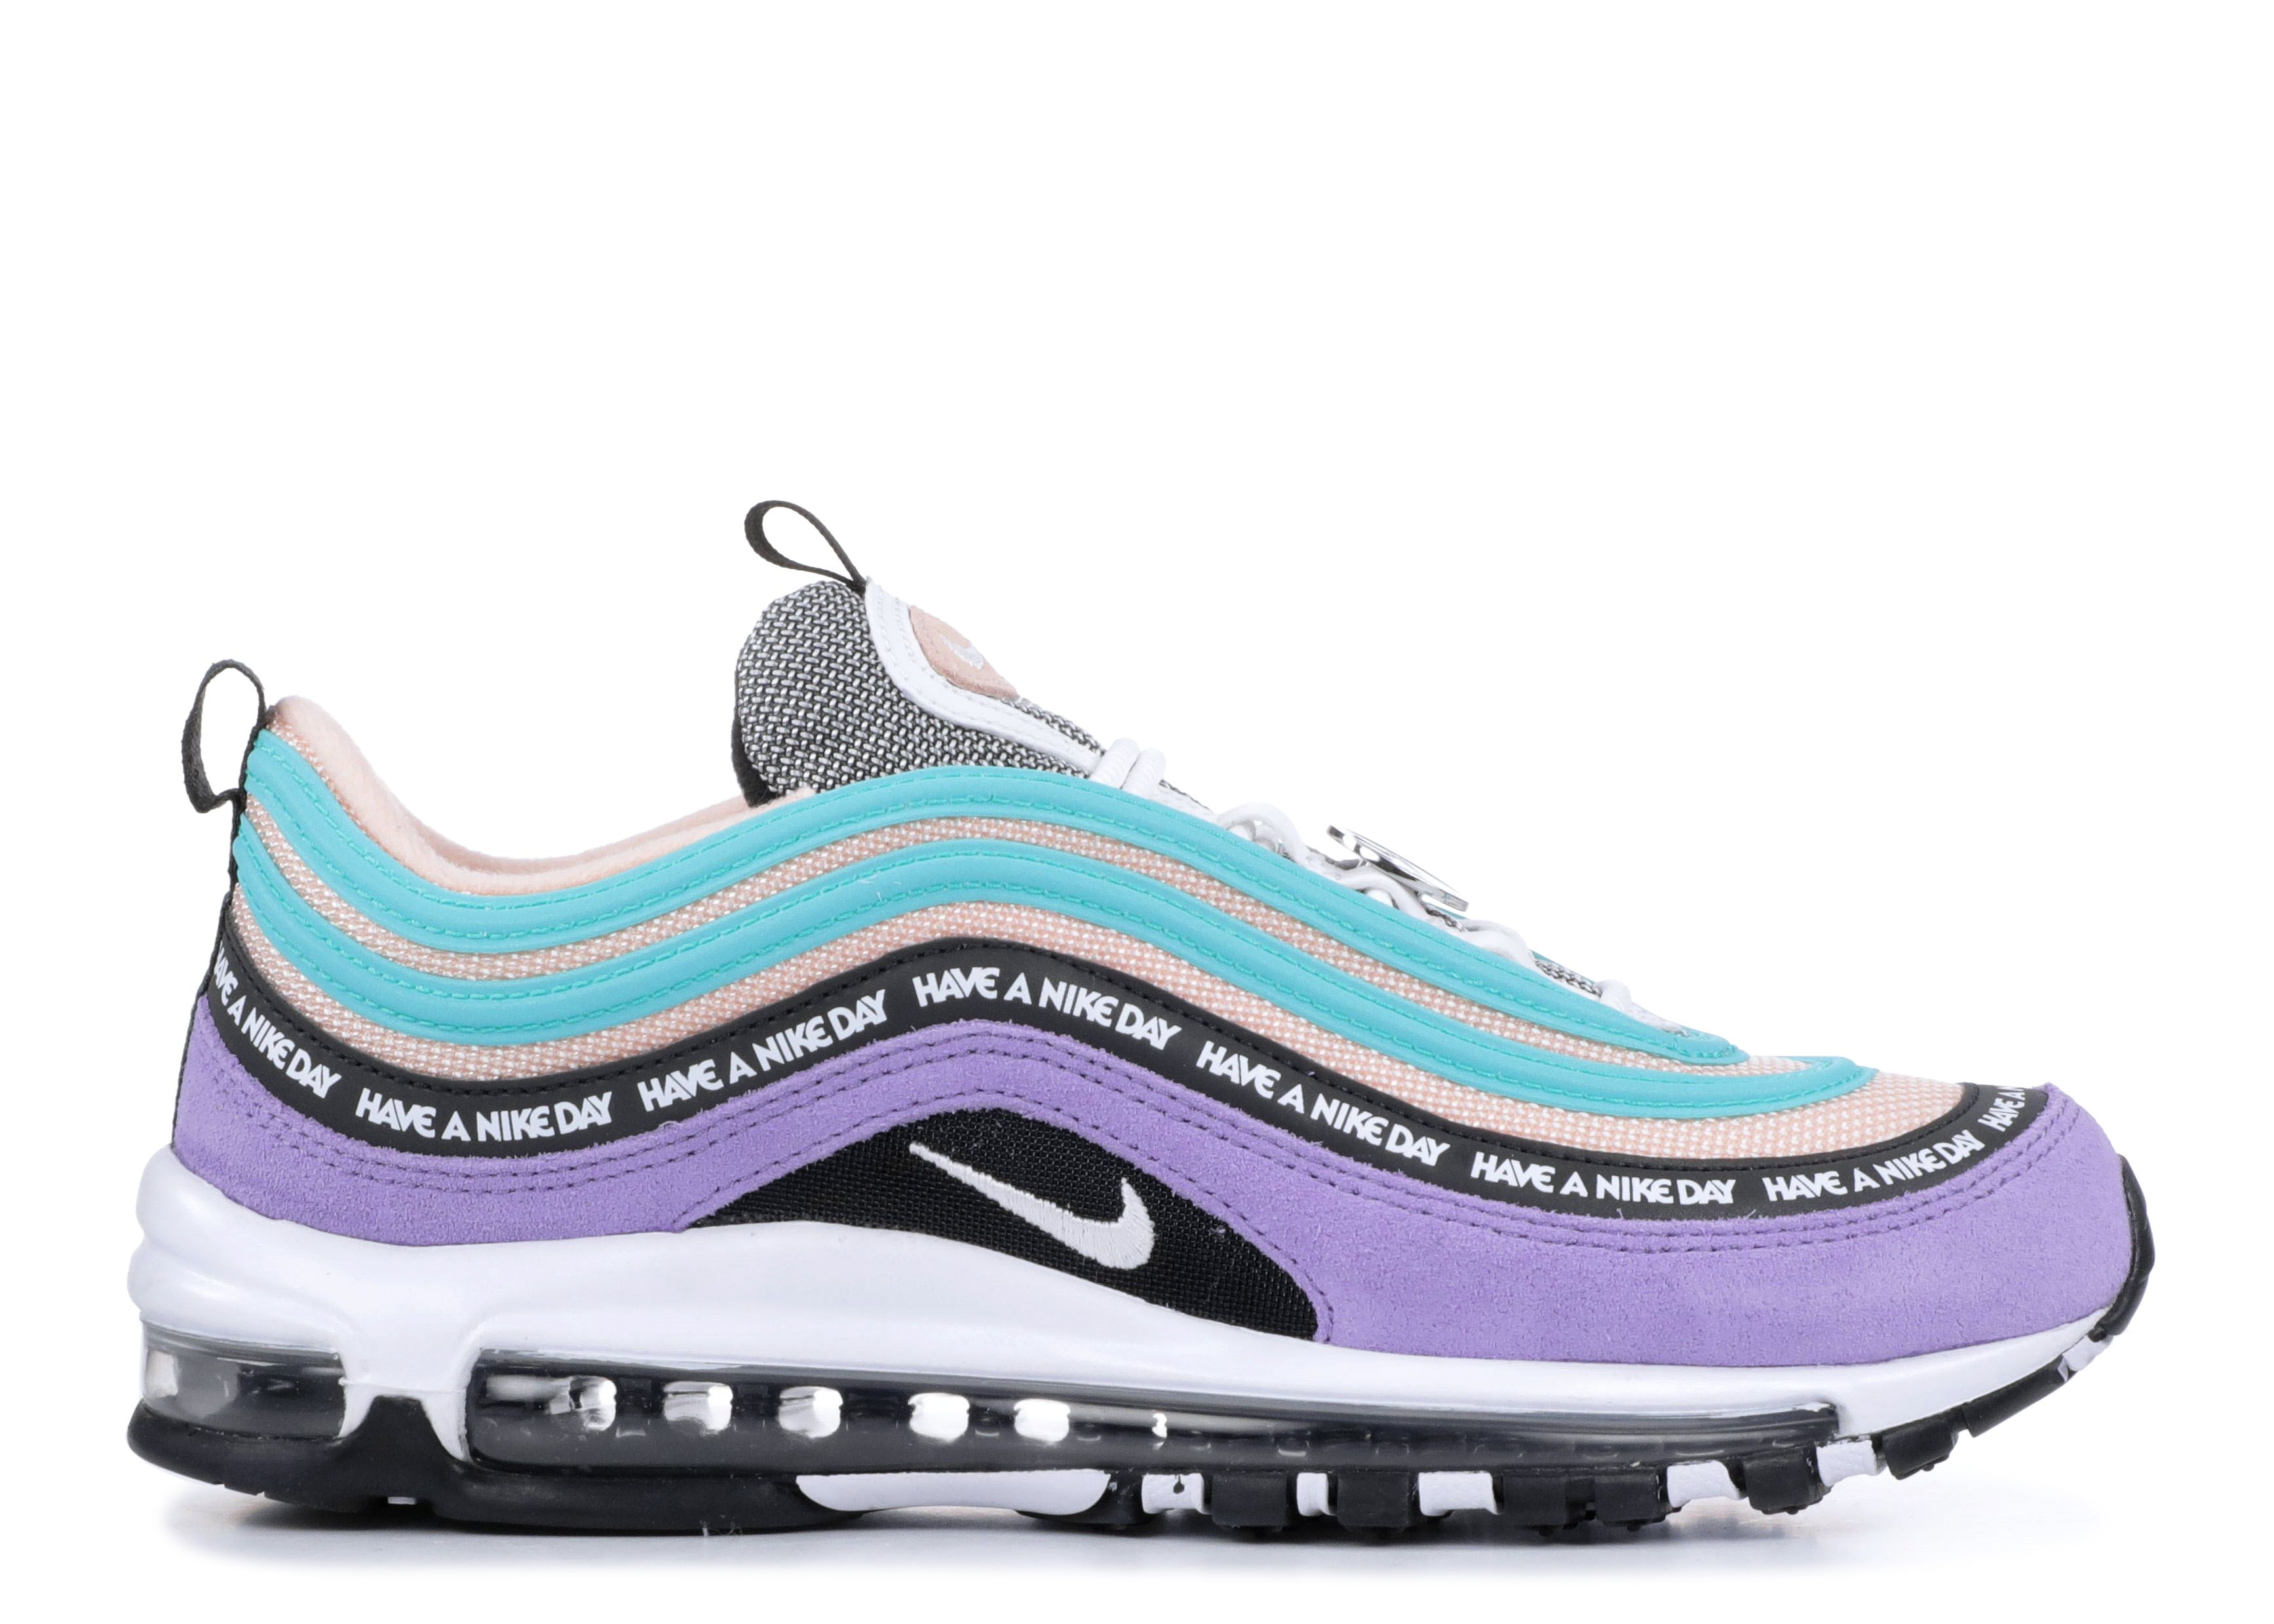 Do not innovation See insects استقال بلا رأس علانية nike air max 97 basic - stoprestremember.com